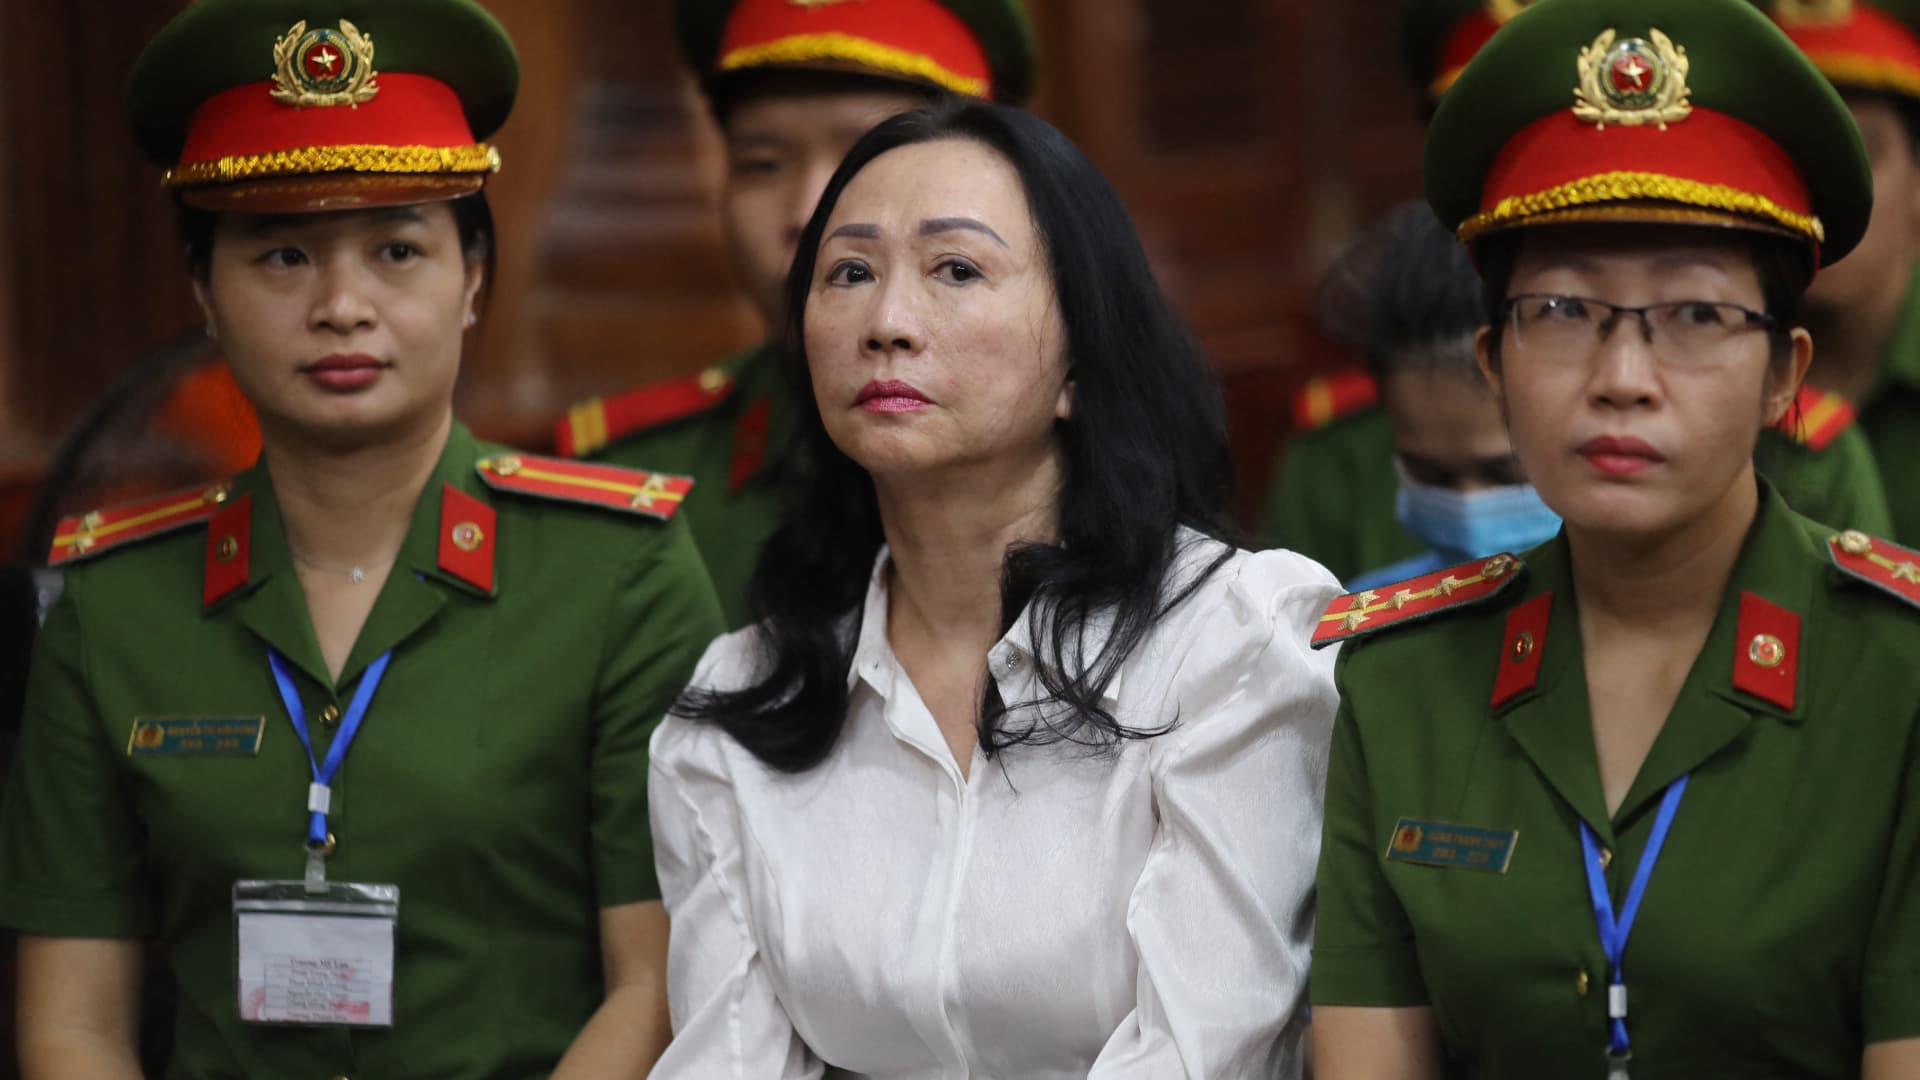 Vietnamese property tycoon sentenced to death in country’s biggest ever financial fraud, state media reports